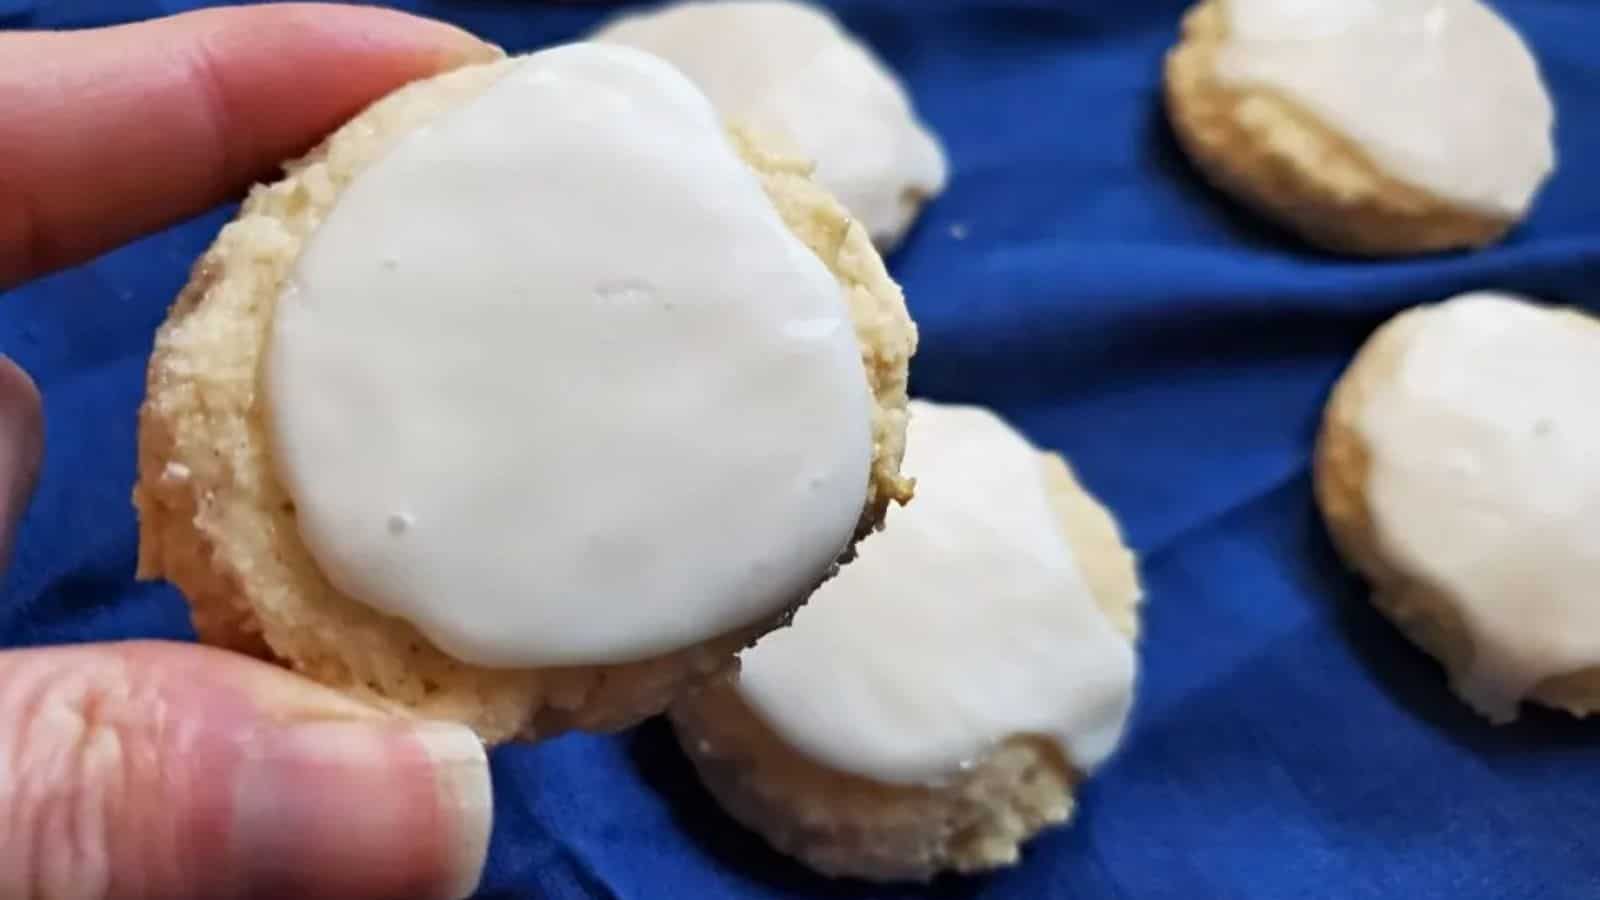 Image shows a fingers holding a Chewy Lemon Cookie with more in the background.